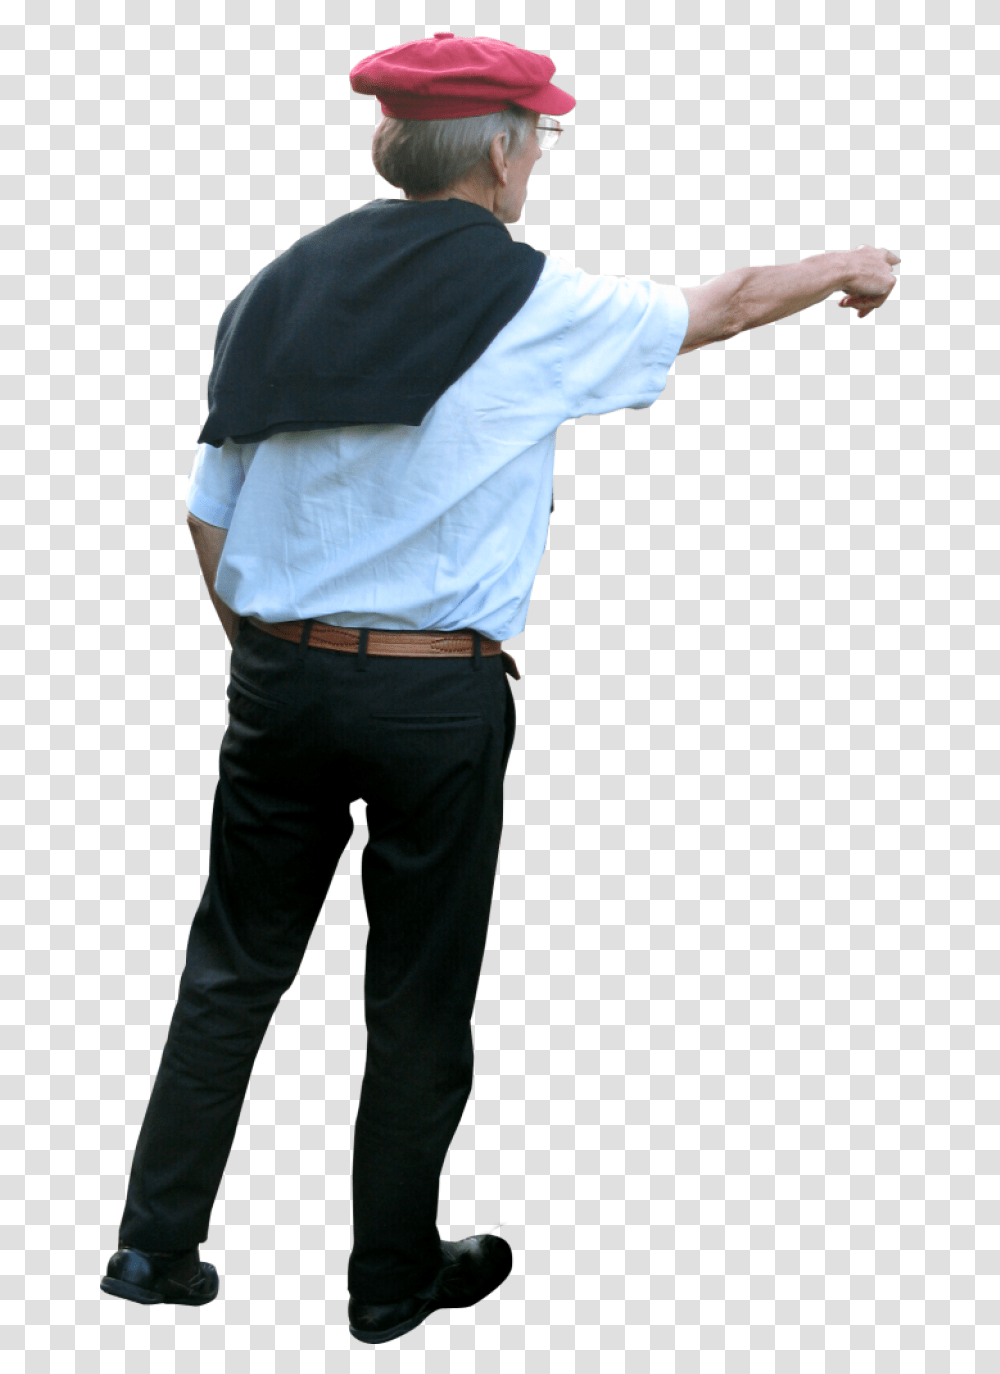 Pointer To The Right Image People Pointing, Clothing, Person, Pants, Shirt Transparent Png